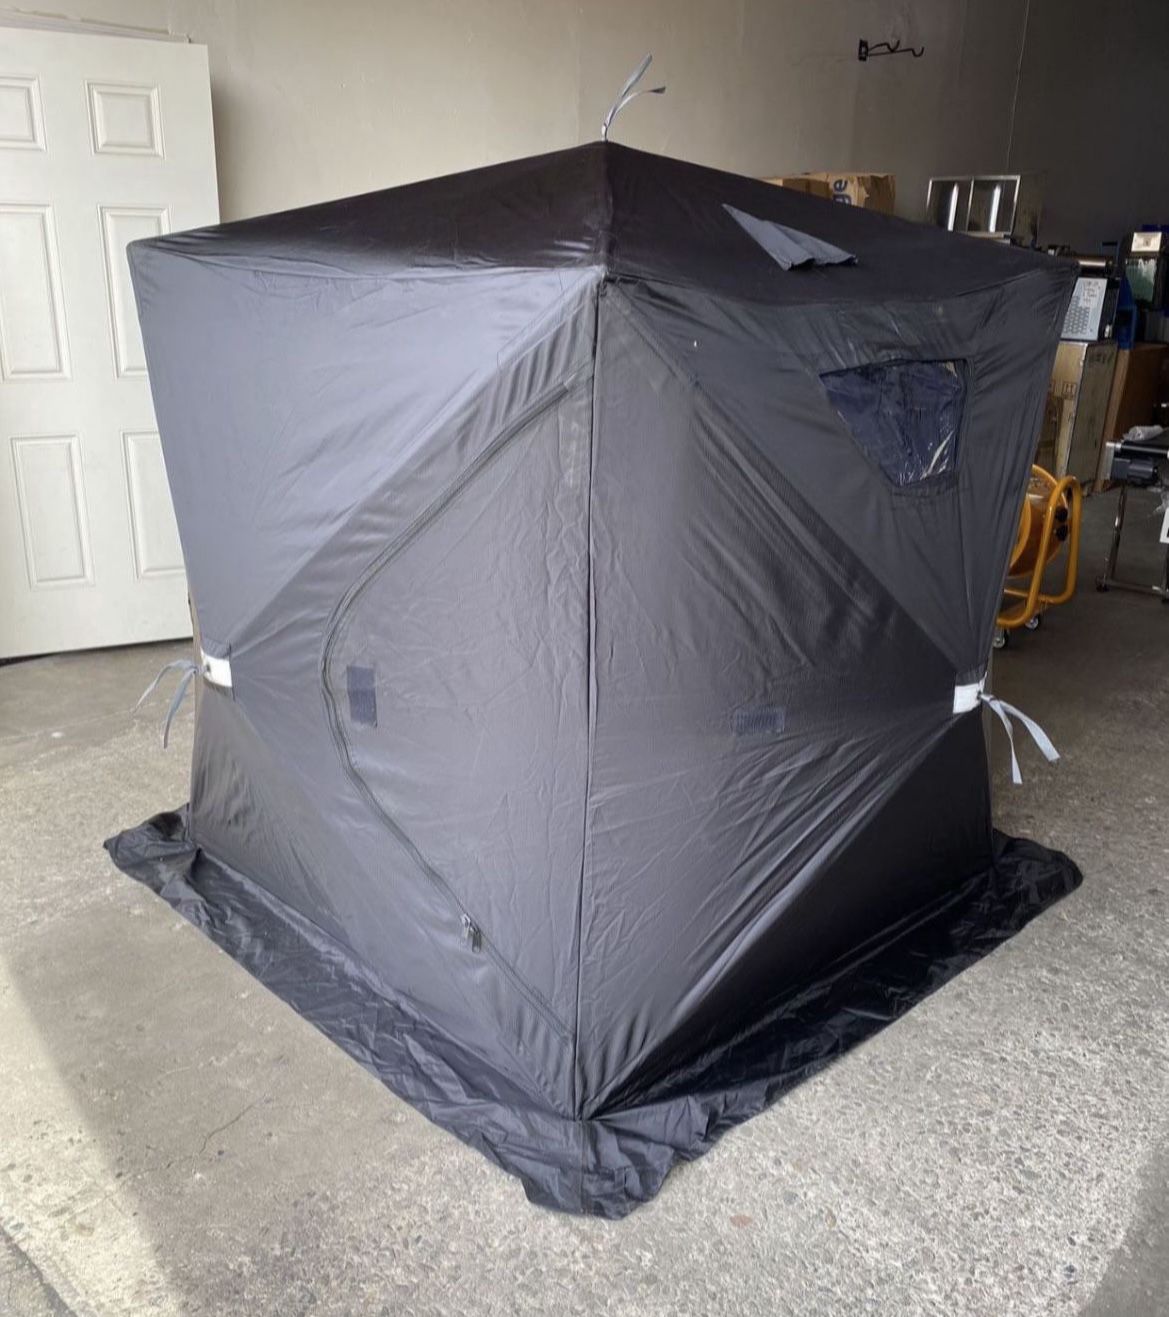 Ice fishing Tent, 2 Person Camping Shelter, Pop-Up Portable Tent, Waterproof. $70.00 FIRM!!